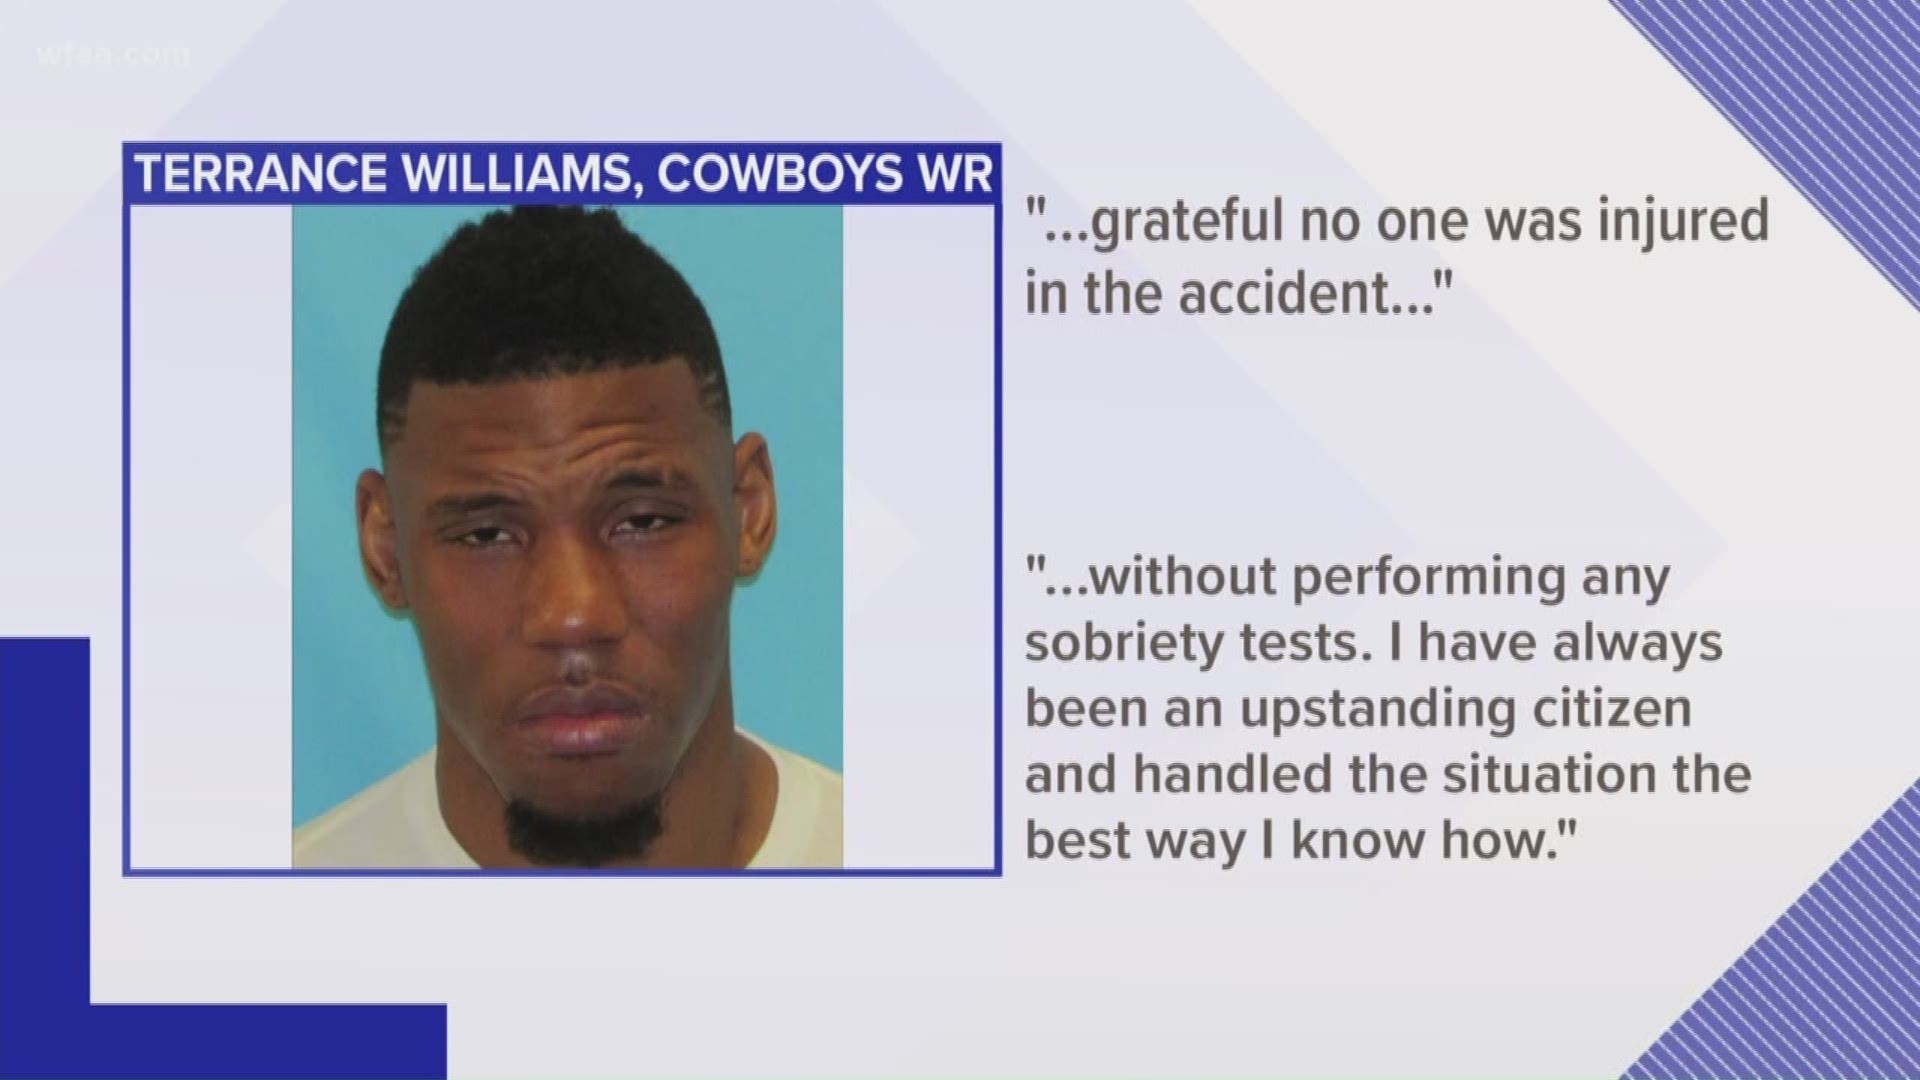 Terrance Williams was arrested on a public intoxication charge near his house in Frisco.